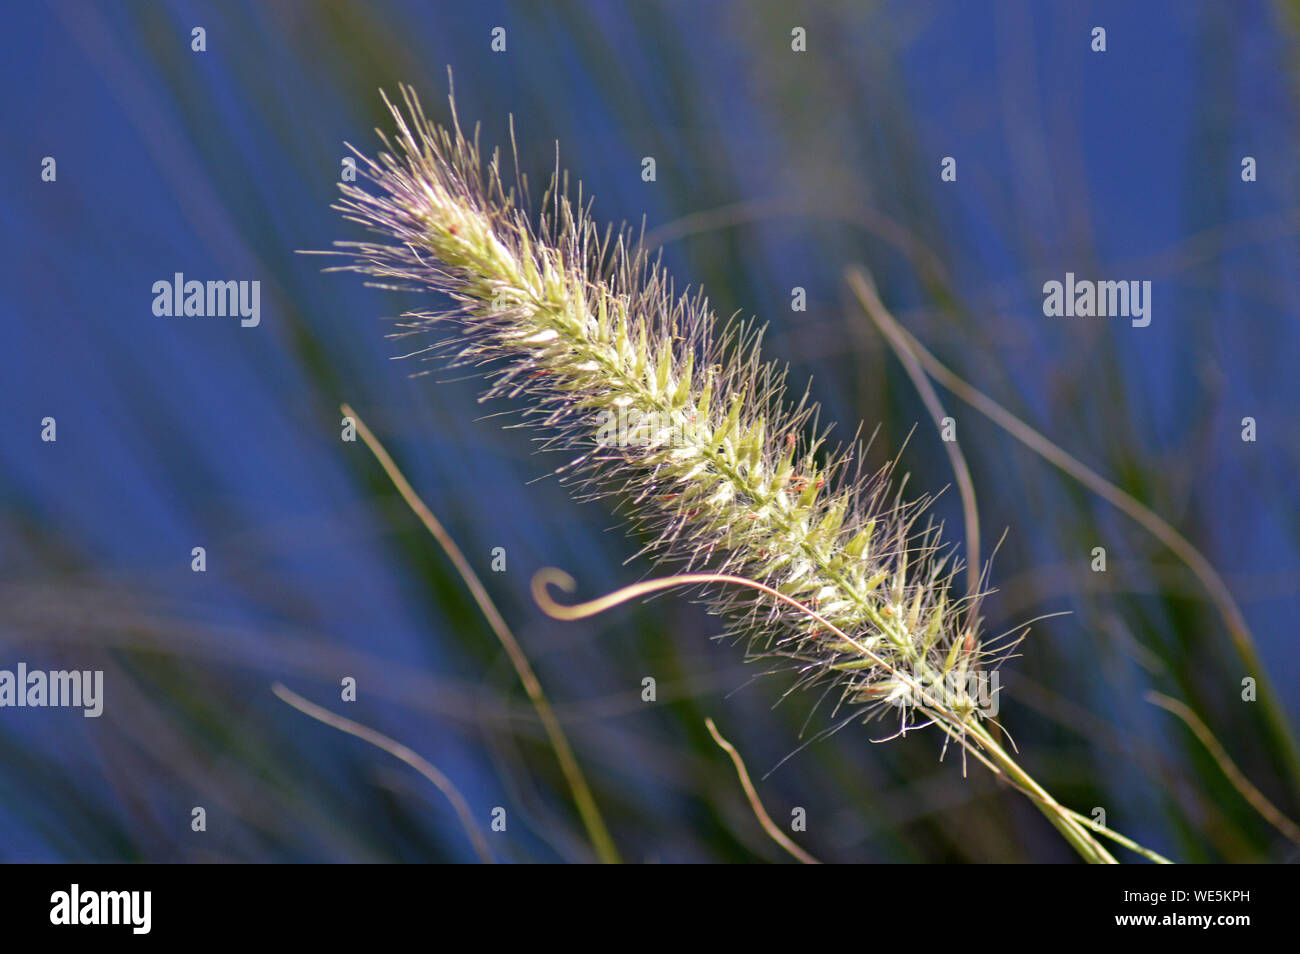 Close-up Of Stalks Plant Growing Outdoors Stock Photo